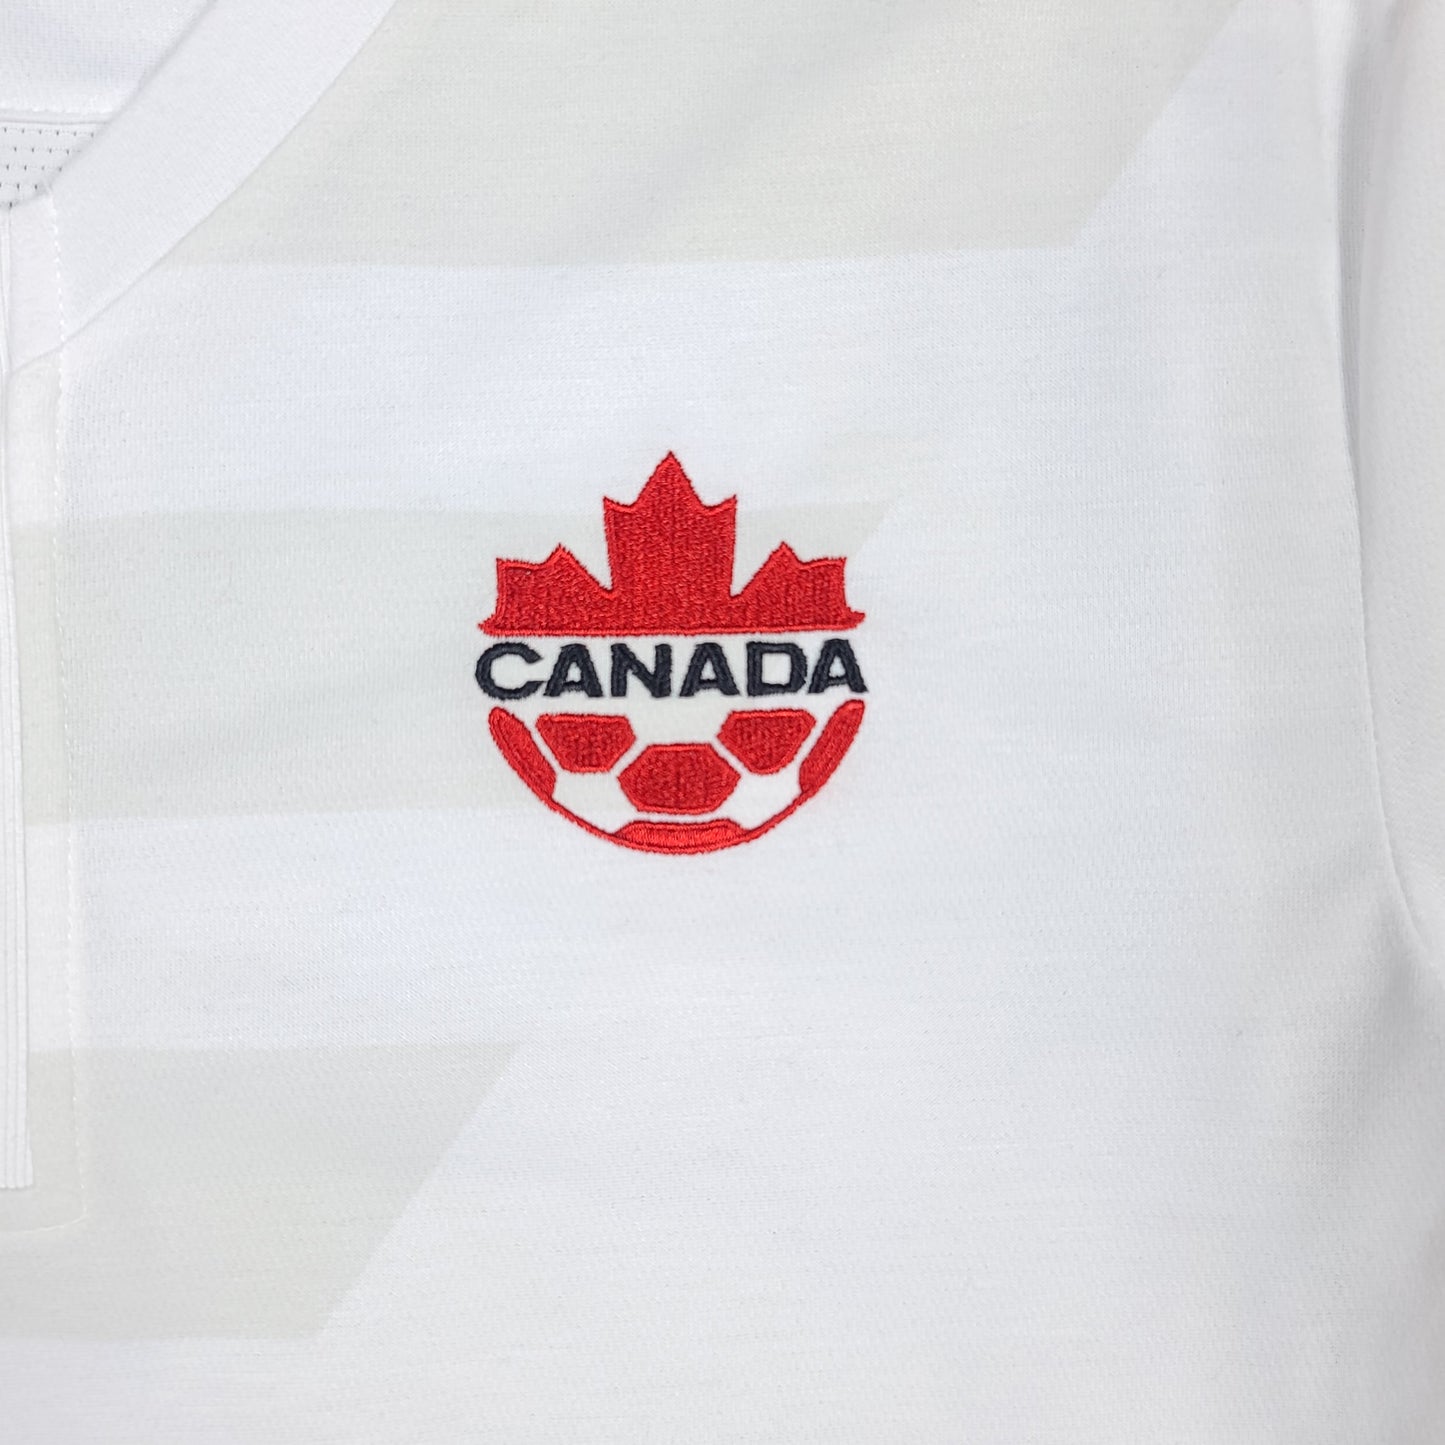 Canada 2015 Umbro Away Youth Soccer Jersey